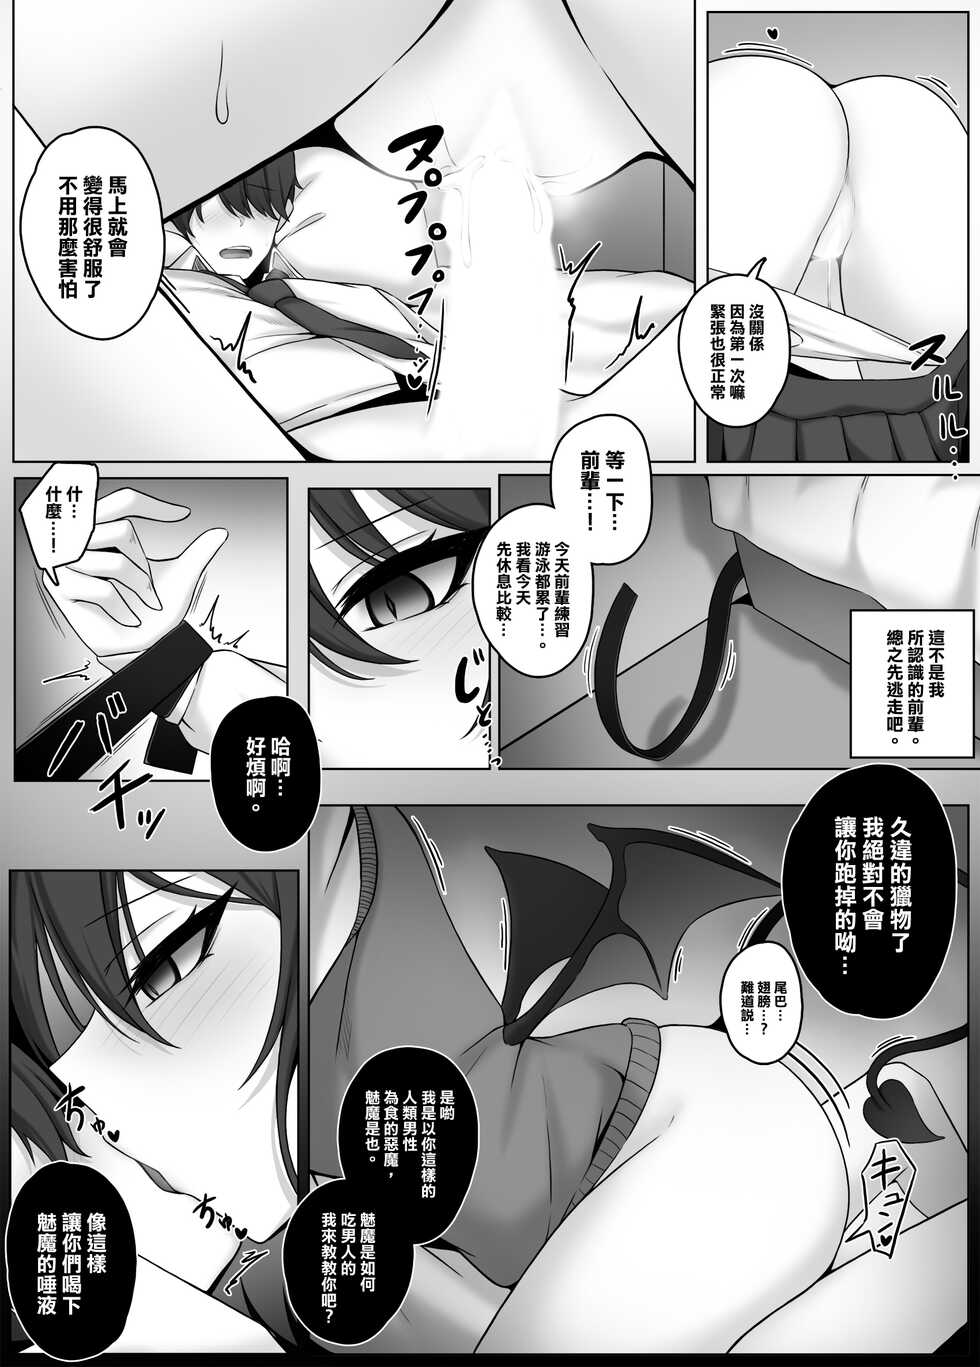 [Djqn] Succubus House [Chinese] [沒有漢化] - Page 6